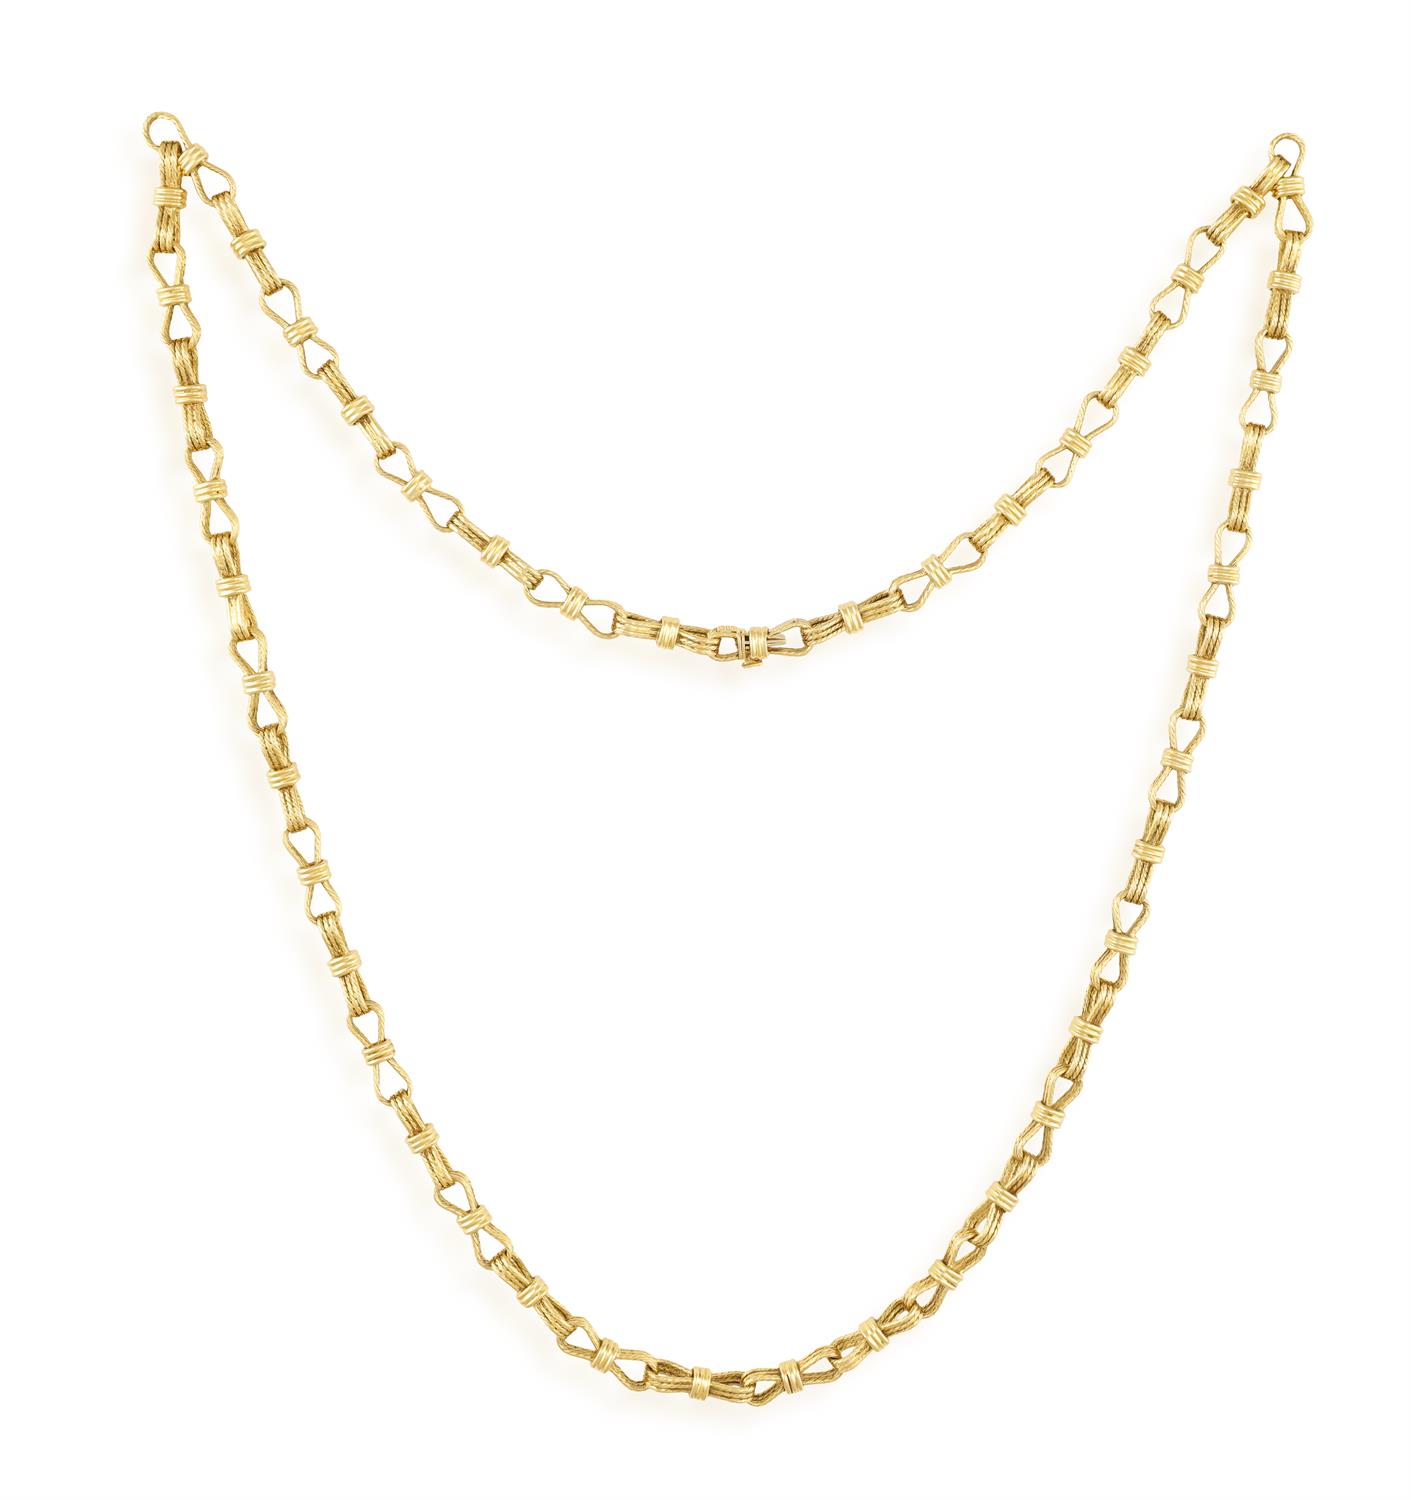 A GOLD SAUTOIR NECKLACE, BY CARLO WEINGRILL FOR BULGARI, CIRCA 1960 The long fancy-link chain